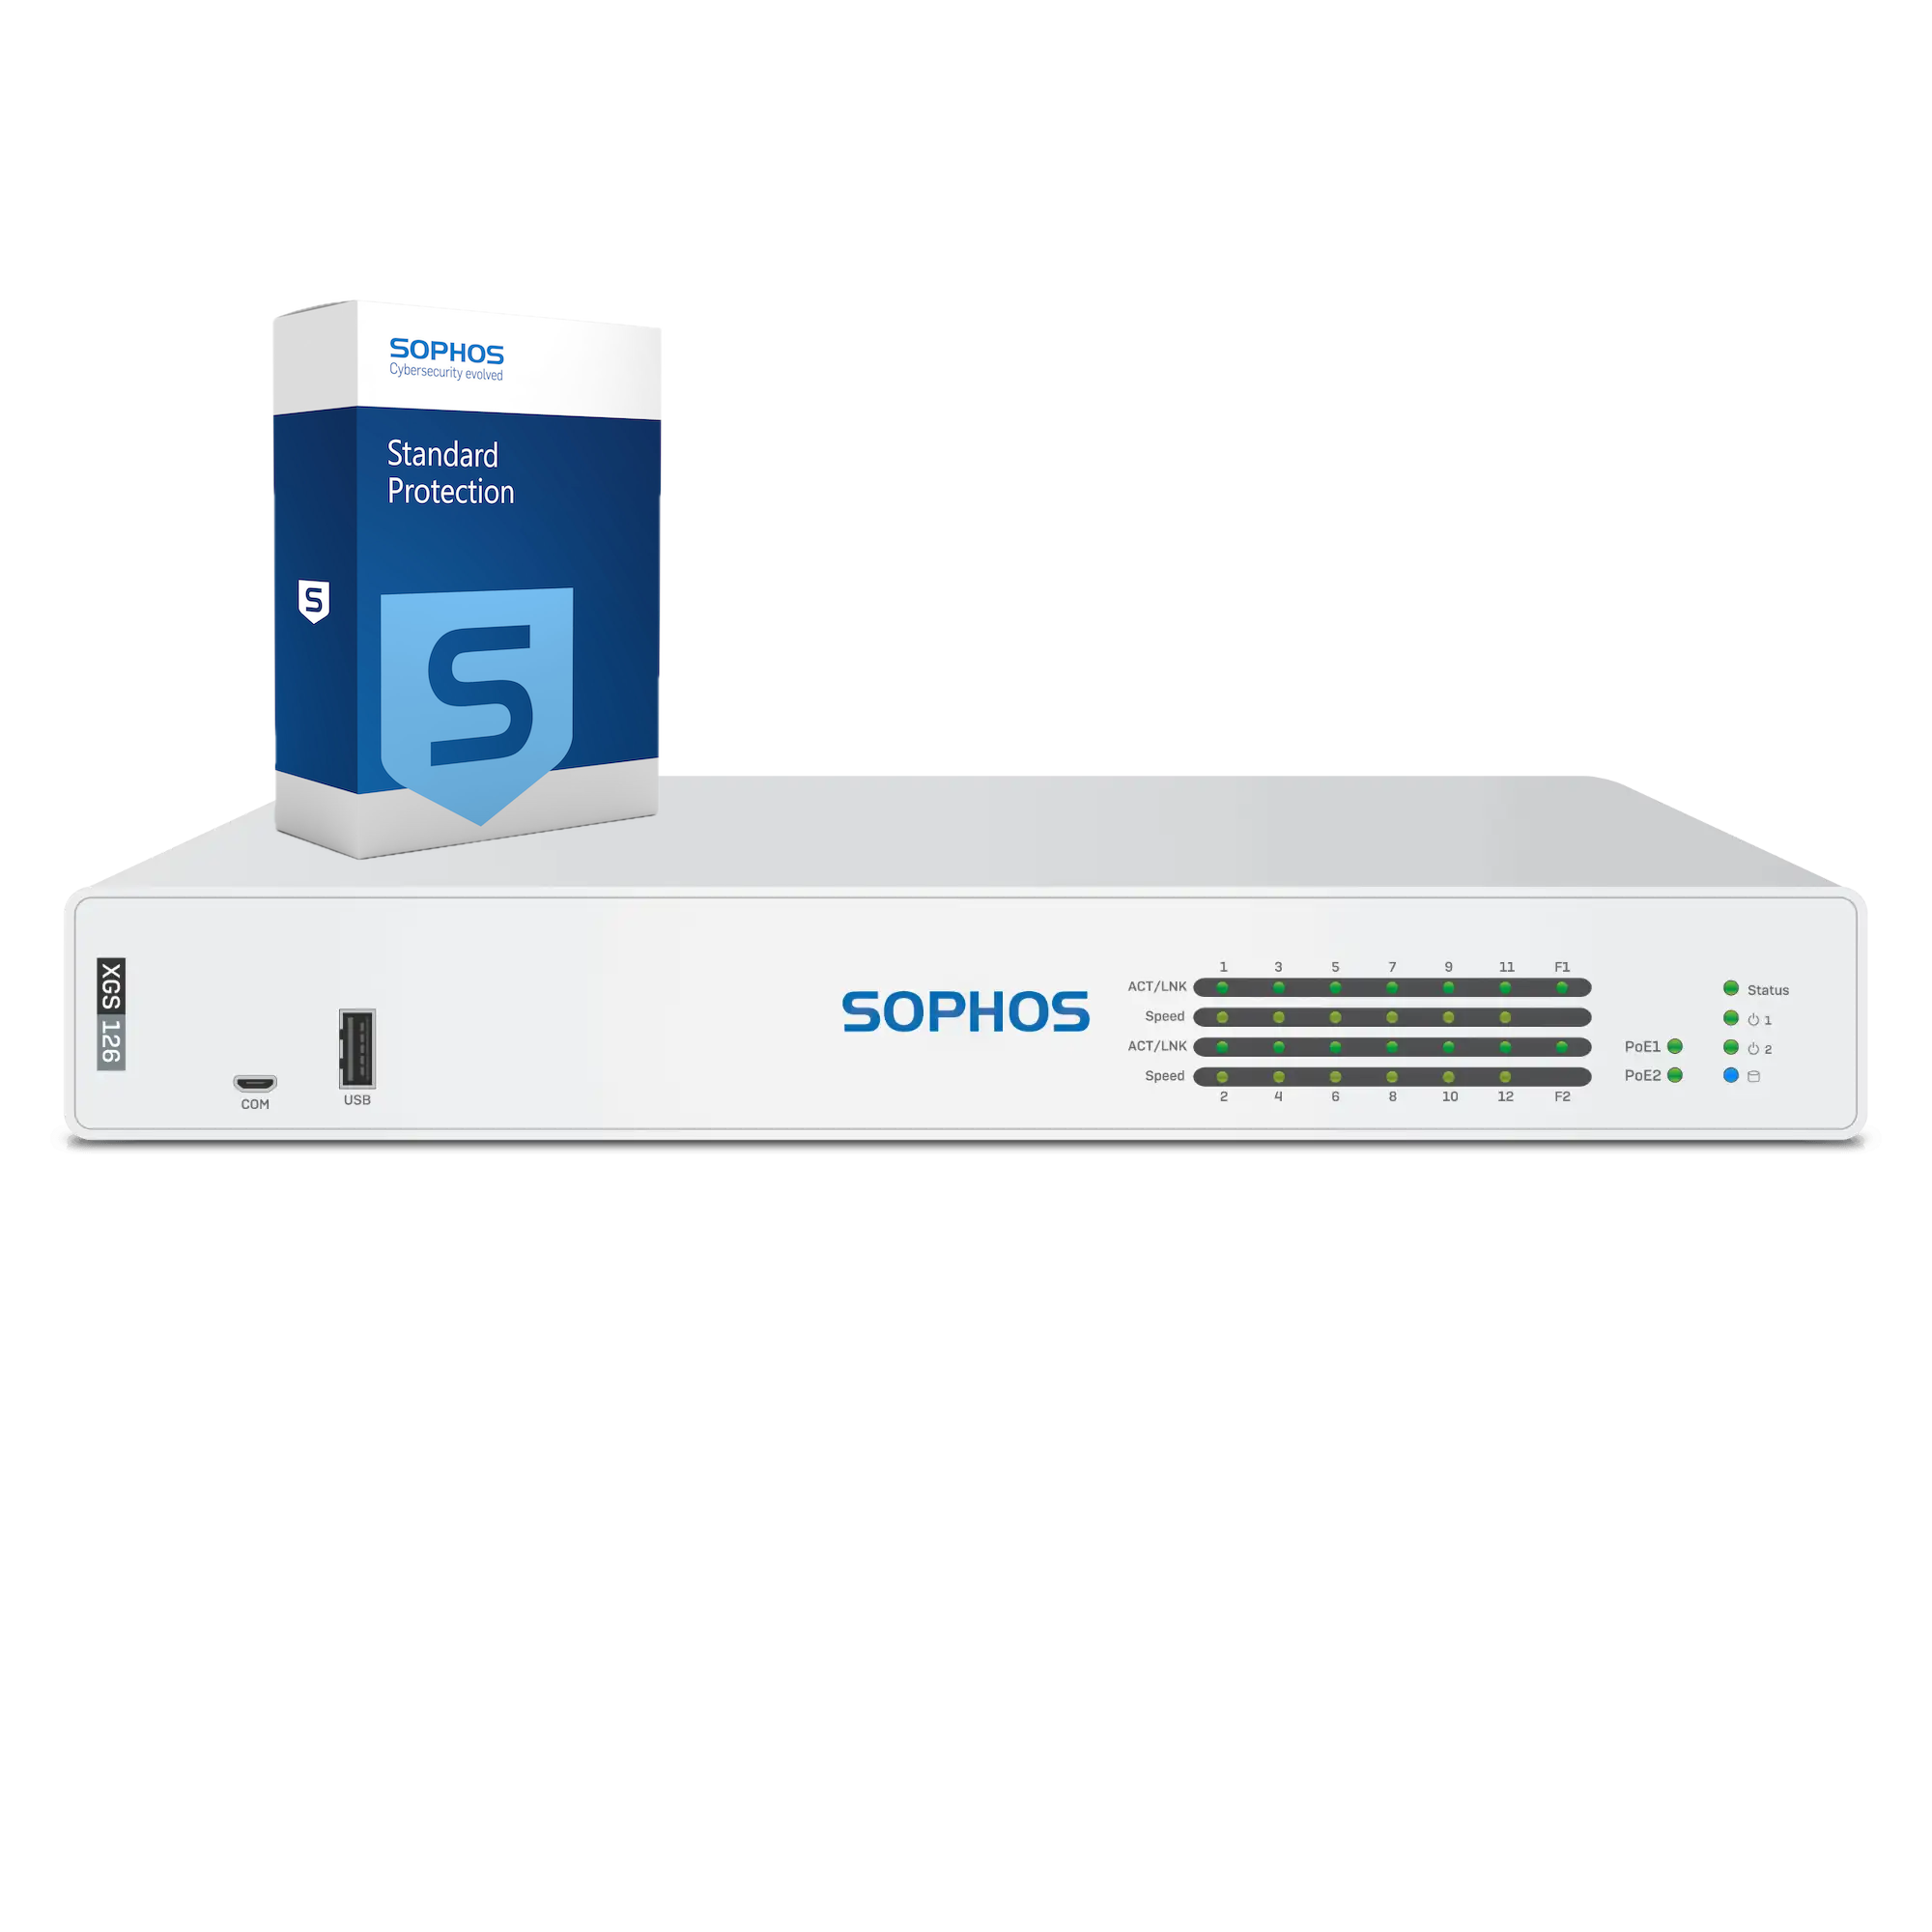 Sophos XGS 126 Firewall with Standard Protection, 3-year - EU power cord